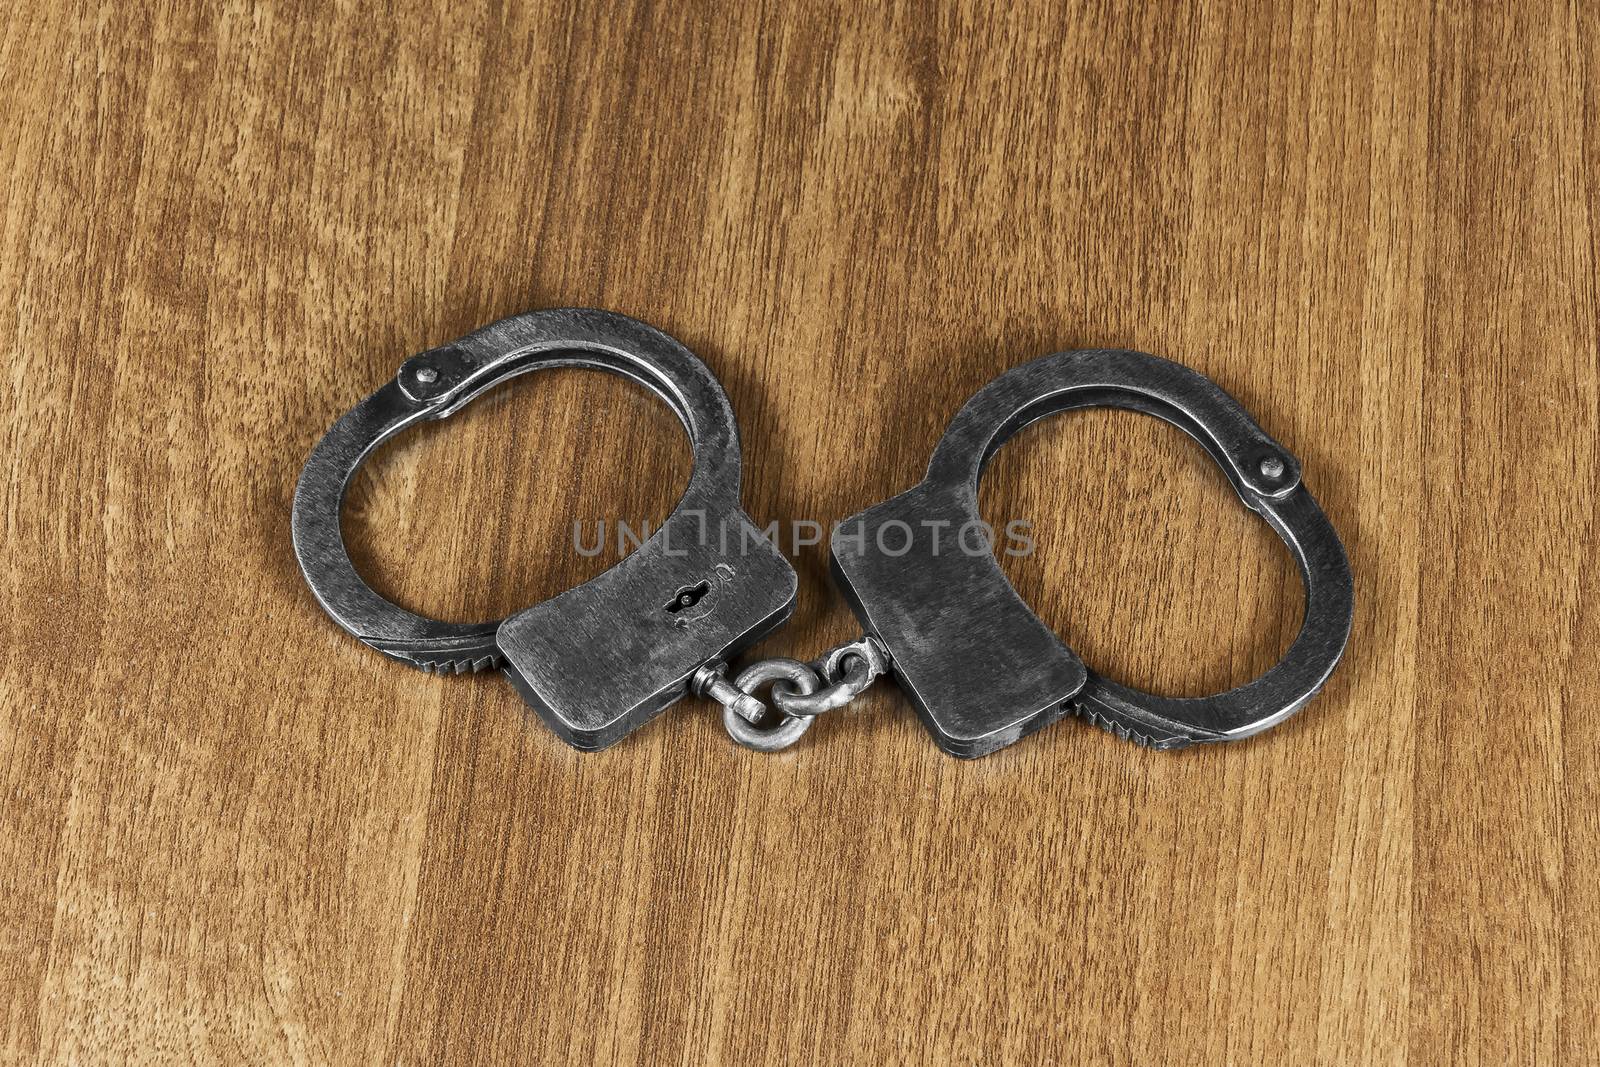 On the wooden table lie the police handcuffs by Grommik